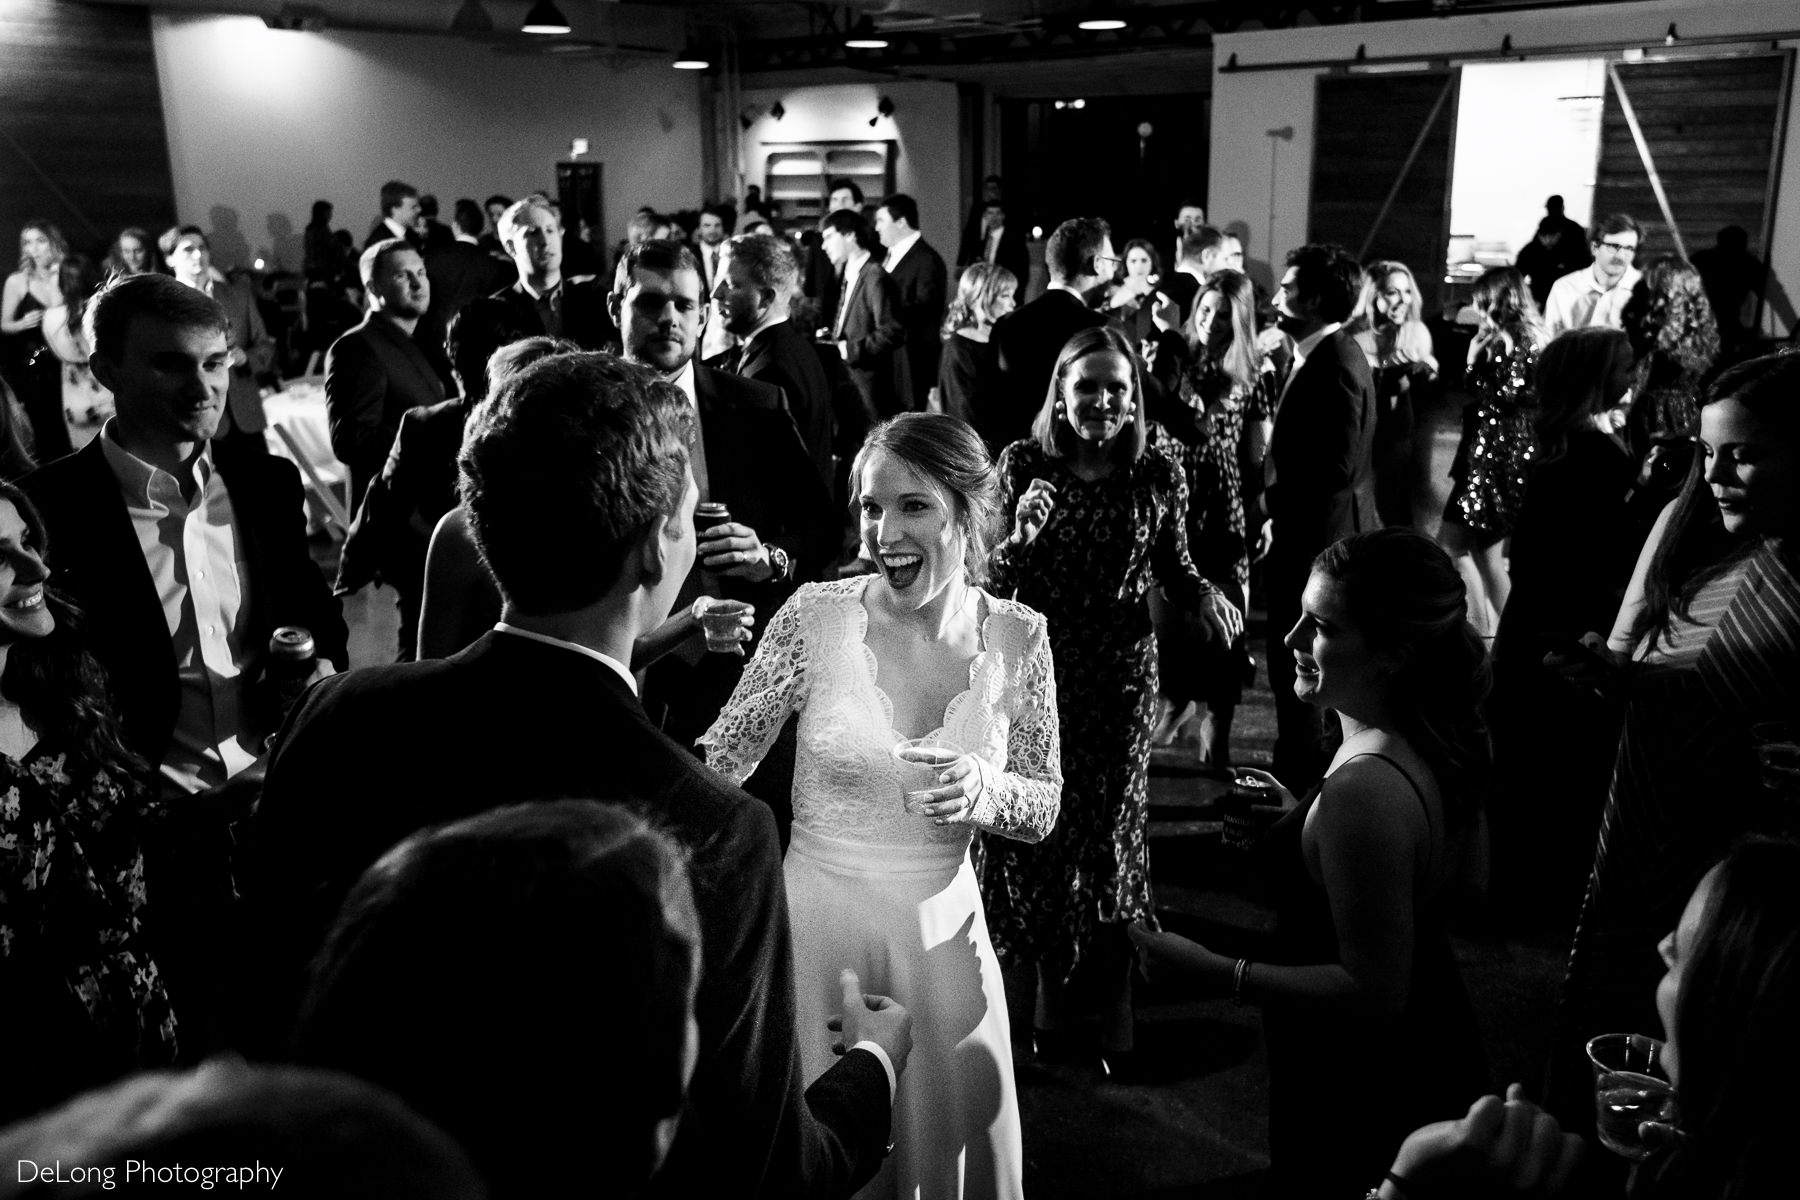 Black and white image from a high angle showing a packed dance floor with the bride smiling at her groom in the middle of the crowd at the Westside warehouse in Atlanta by Charlotte wedding photographers DeLong Photography